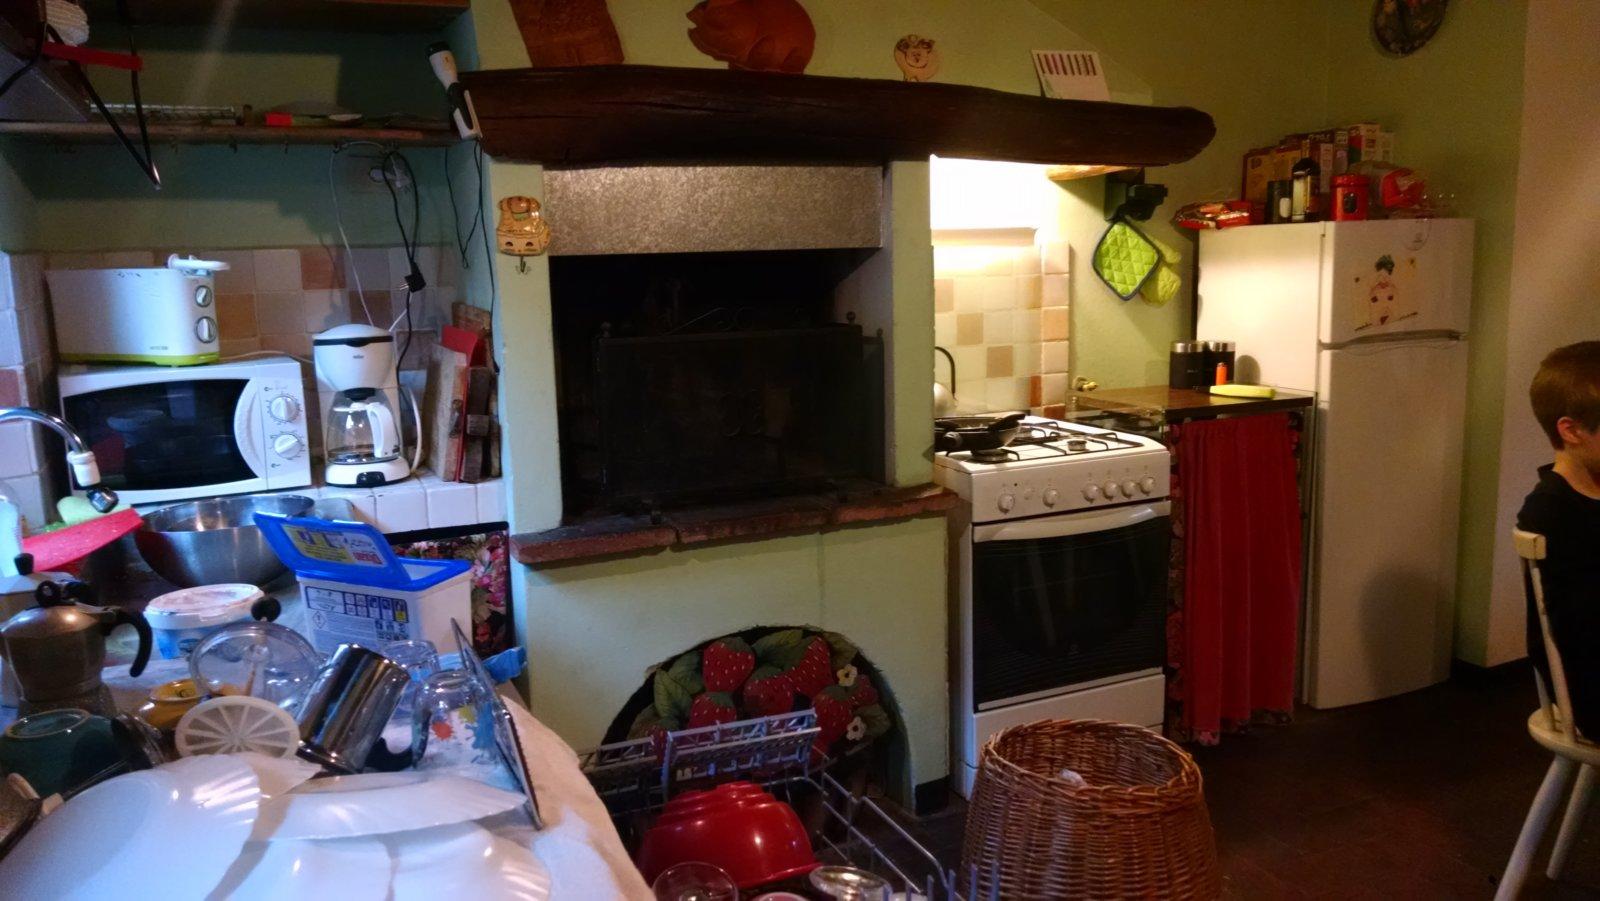 The gas stove and pizza oven.